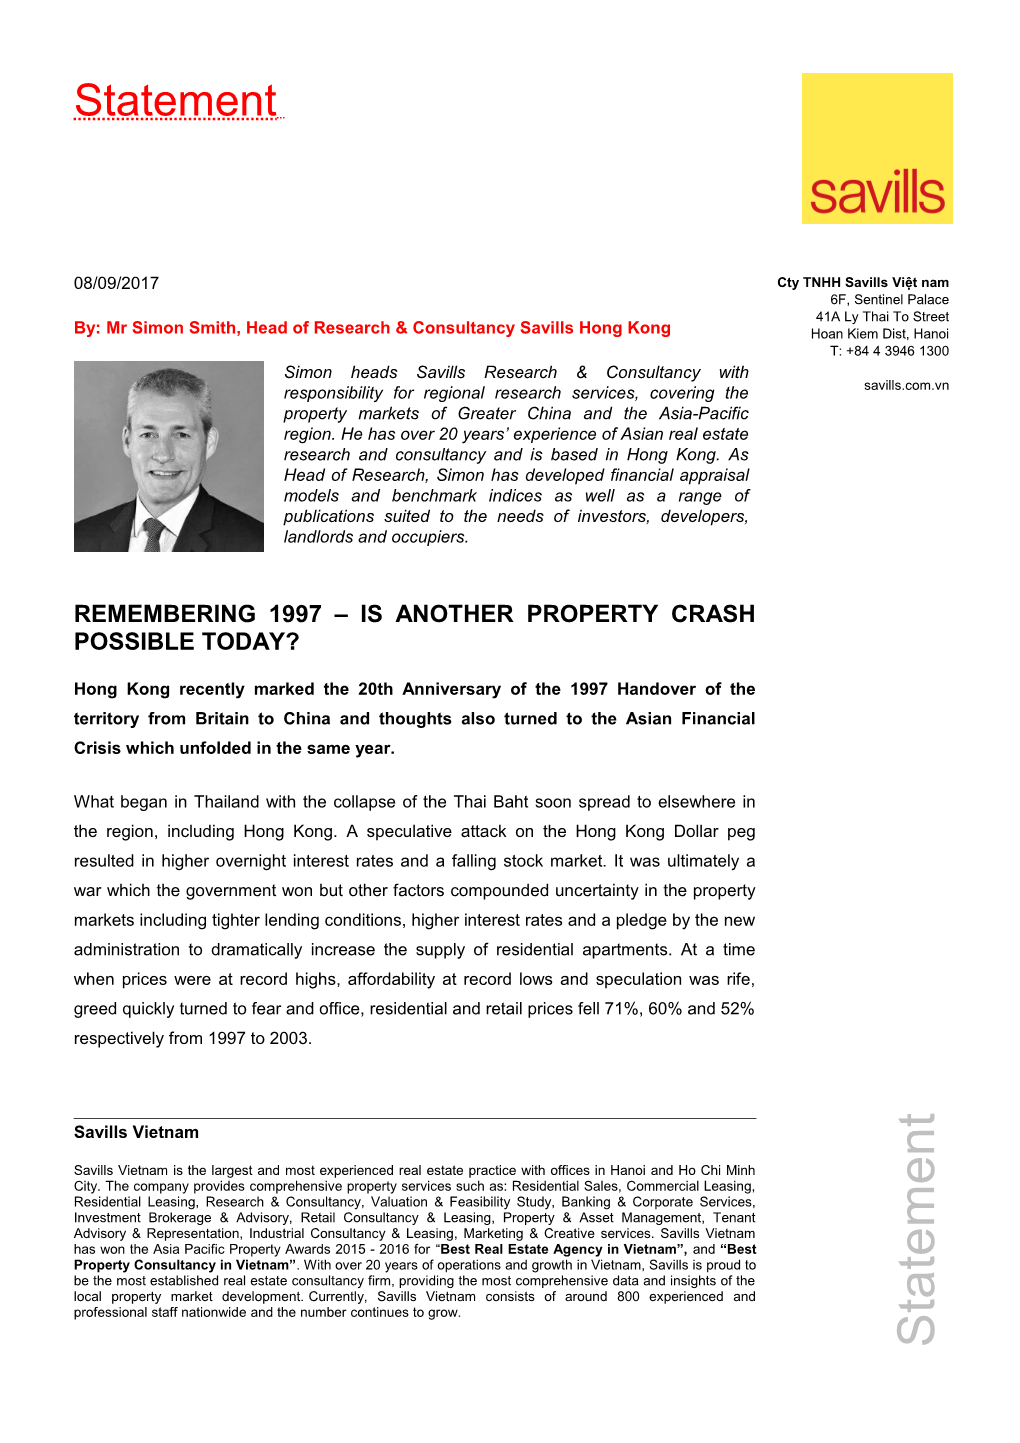 By: Mr Simon Smith,Head of Research & Consultancy Savills Hong Kong